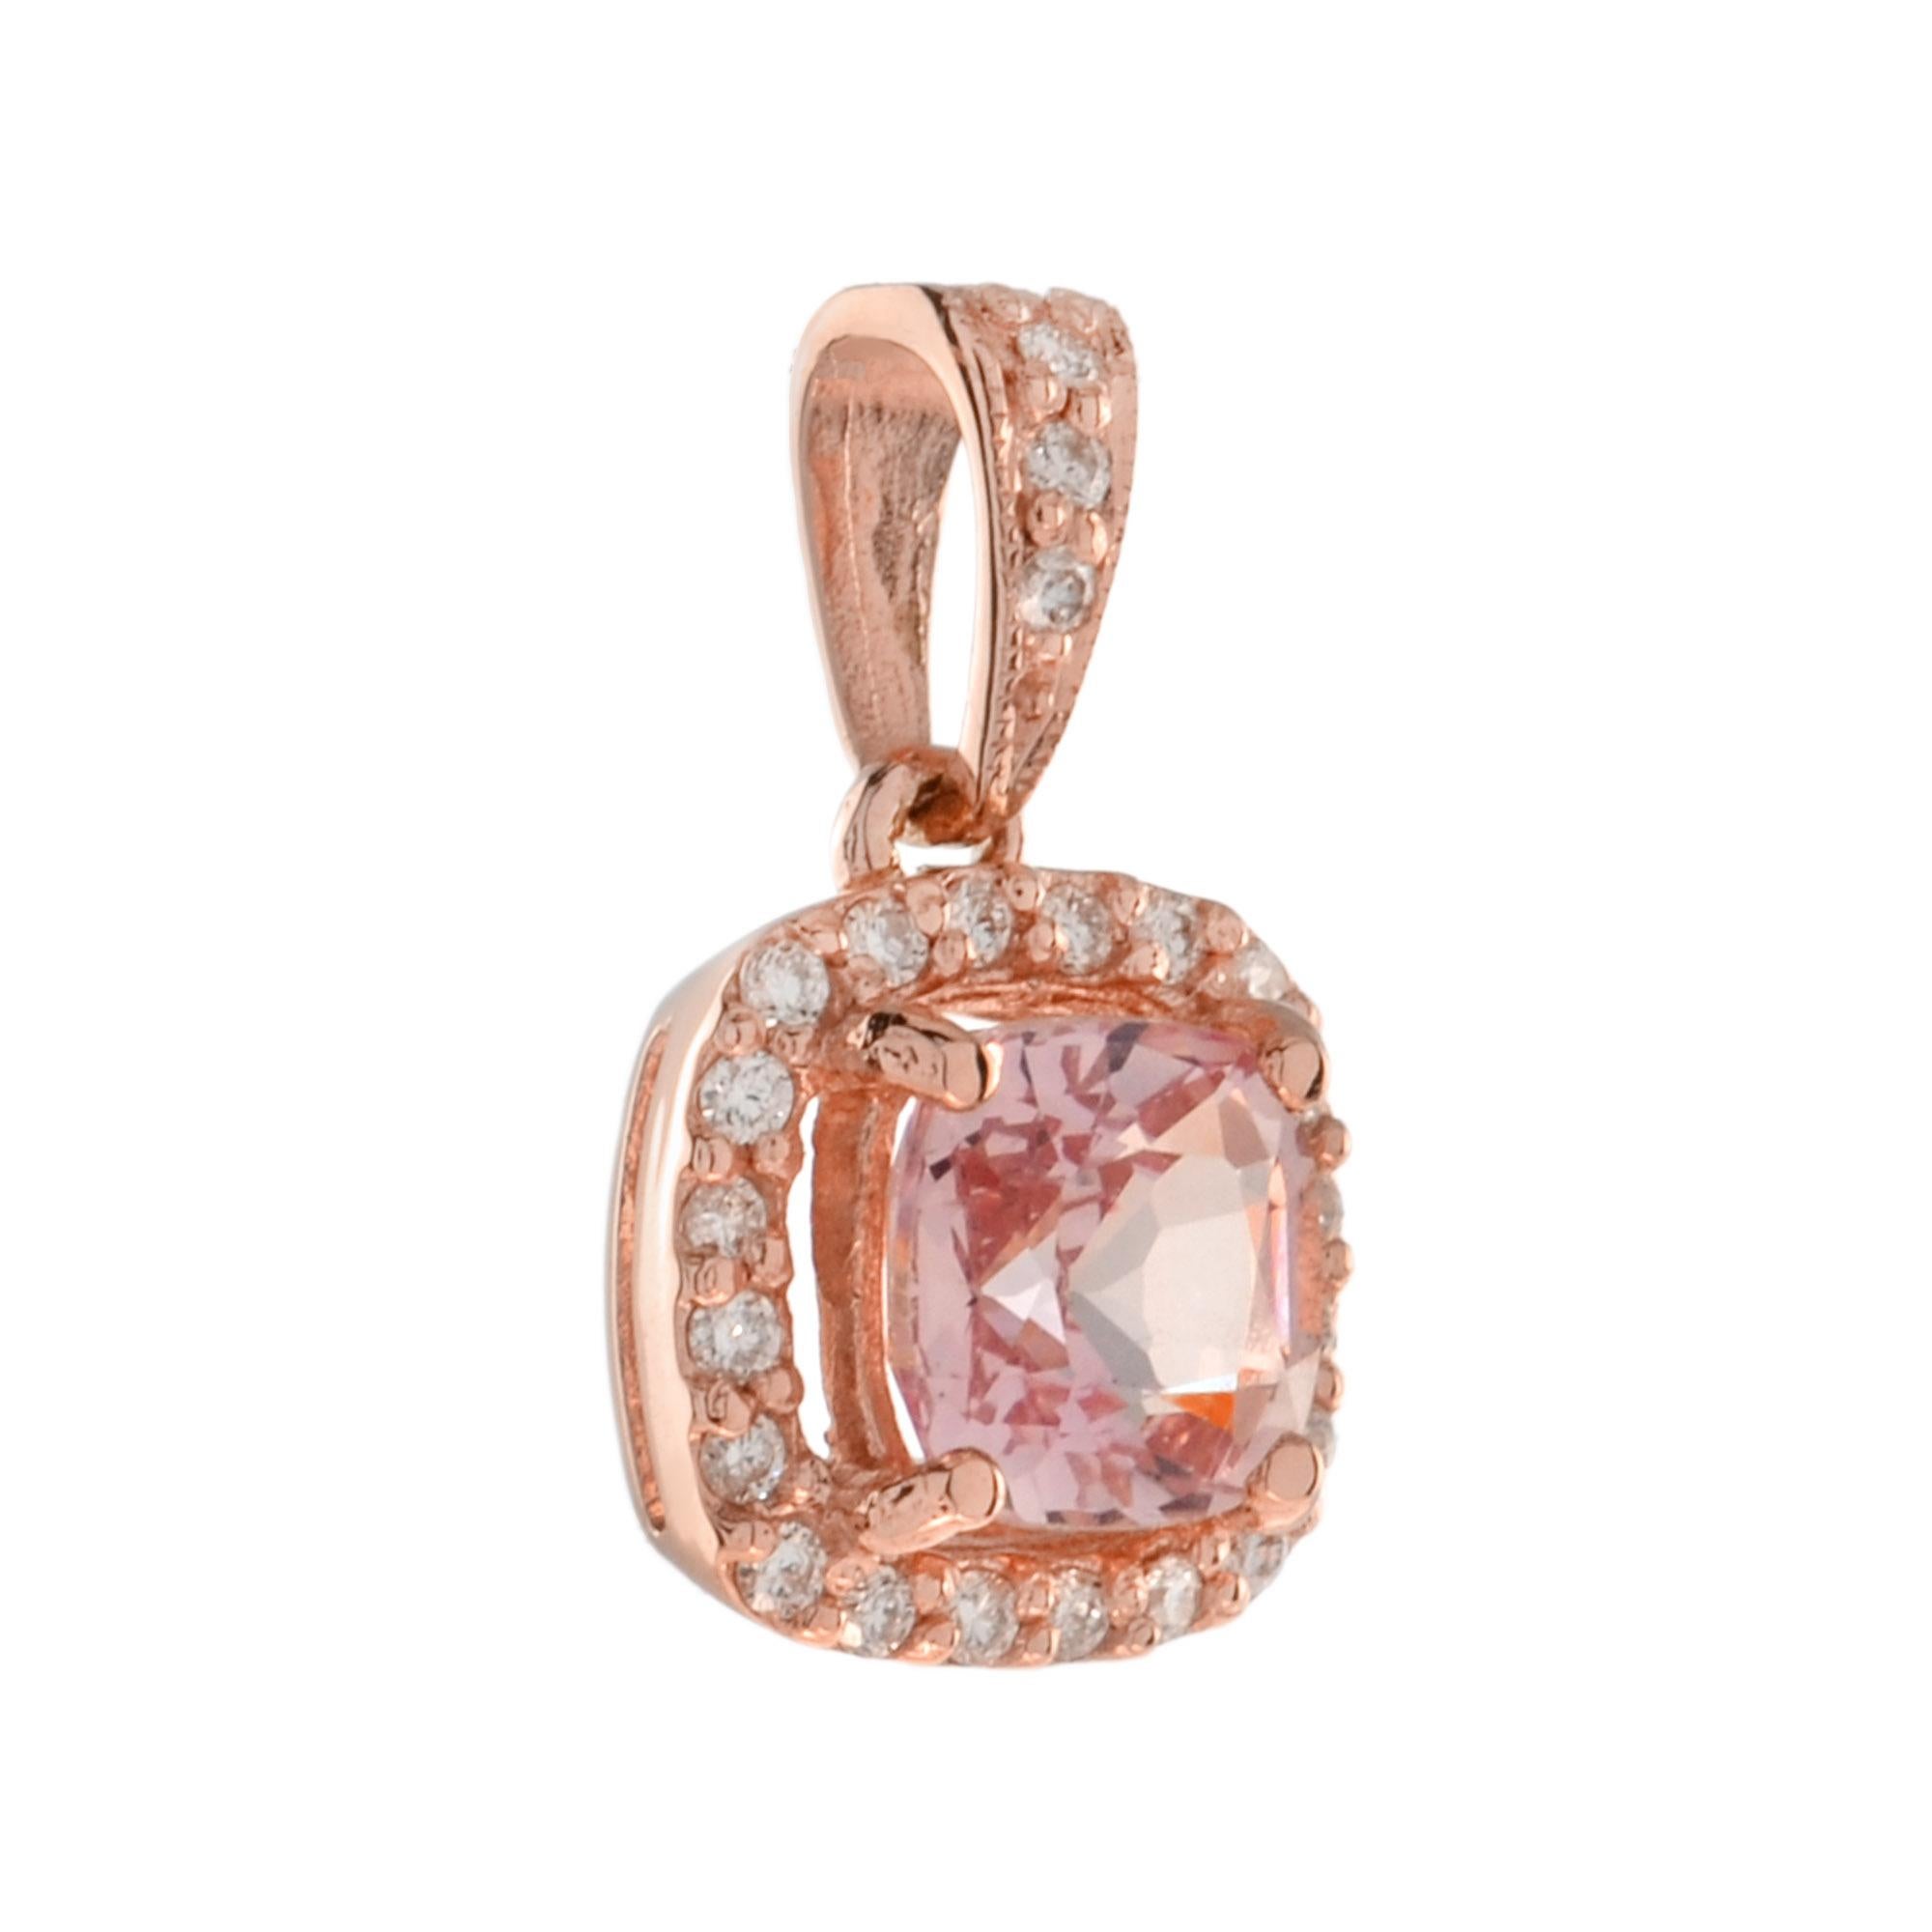 This gorgeous 14k rose gold halo pendant features a 1.50 carat cushion-cut morganite surrounded by a halo of tiny diamonds. An effortless upgrade to your accessary wardrobe. Wear it with our same design ring and earrings for your perfect look.